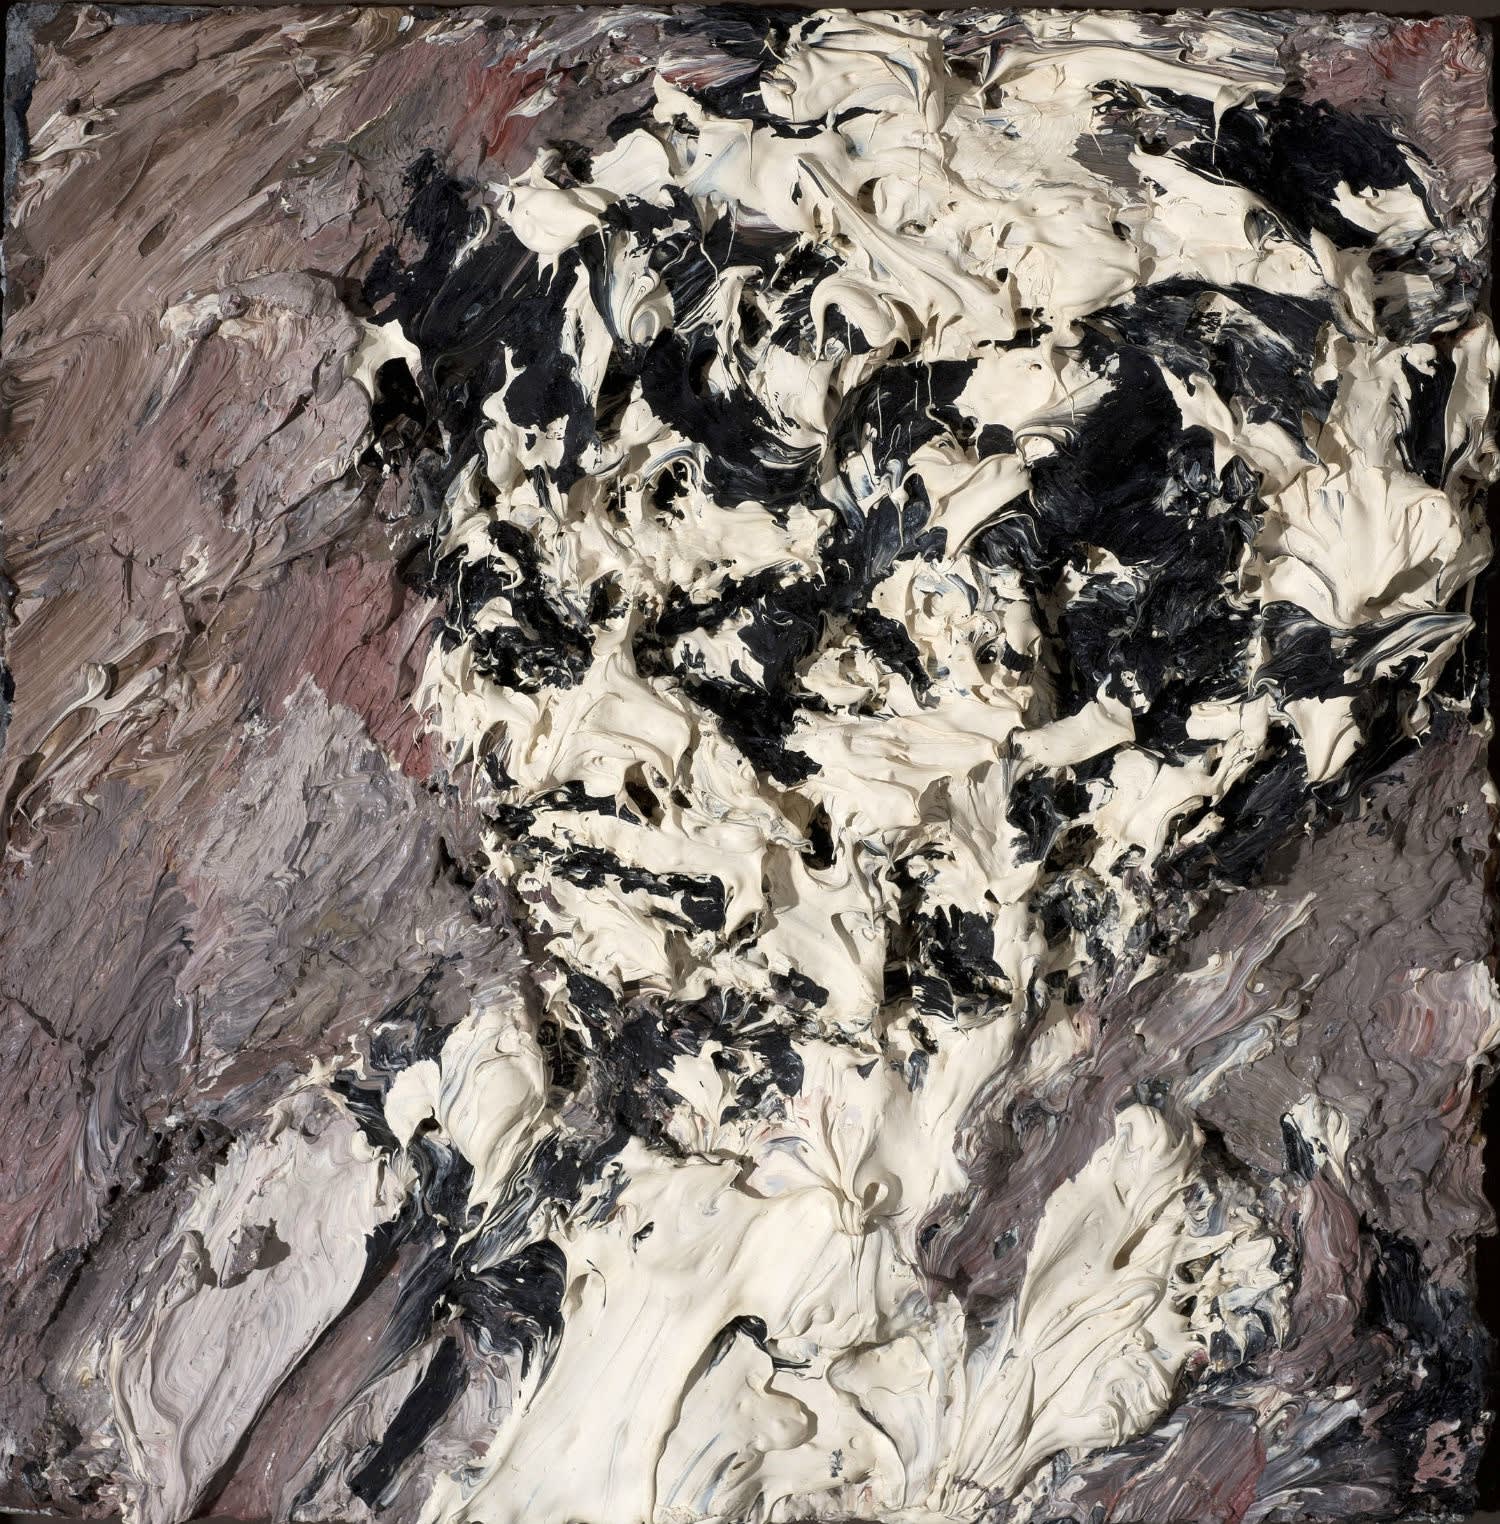 Frank Auerbach (1931-) Head of Helen Gillespie 1962-64 Oil painting on board 29.2 x 29.2 cm On loan to Ben Uri Collection until 2022 © Frank Auerbach, courtesy of Marlborough Fine Art To see and discover more about this artist click here